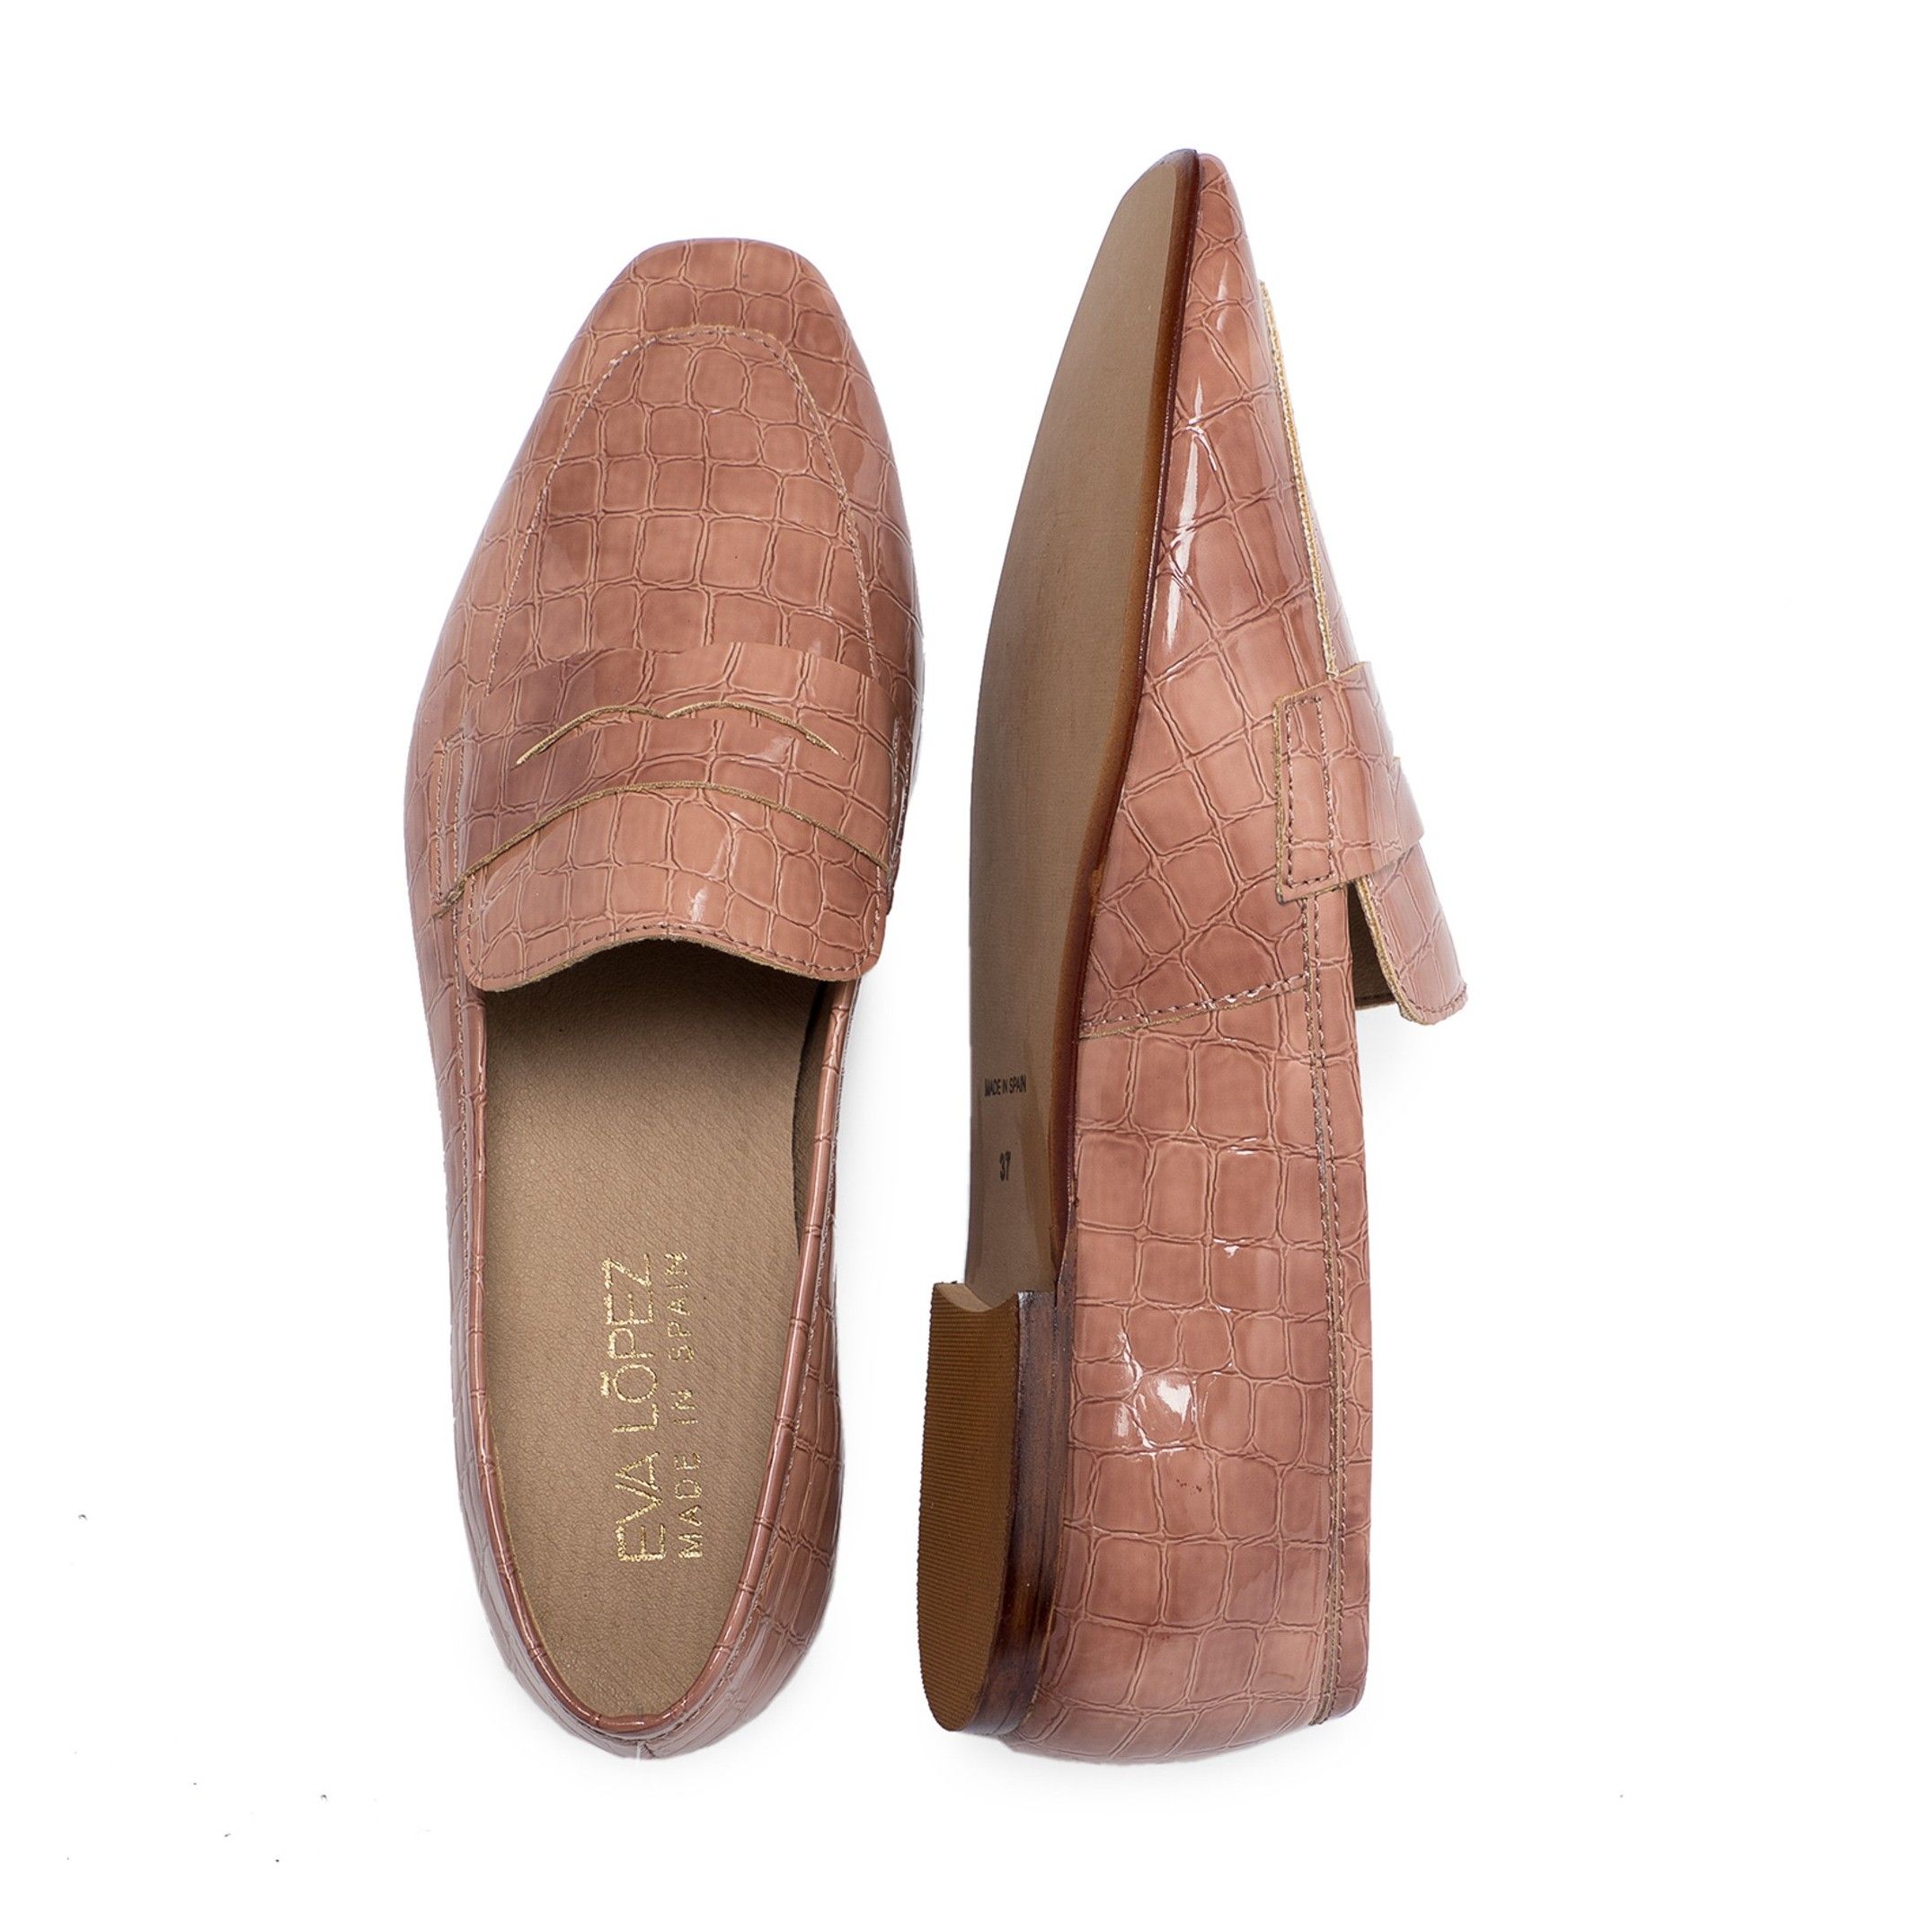 Loafers with mask for women with coconut engraved. By Eva Lopez. Upper made of leatherette. Open Shoe. Inner lining and insole: Breathable, anti-allergic microfiber and keeps the inside of the footwear dry. Sole material: Cuerolite. Heel height: 1 cm. Designed and manufactured in Spain.